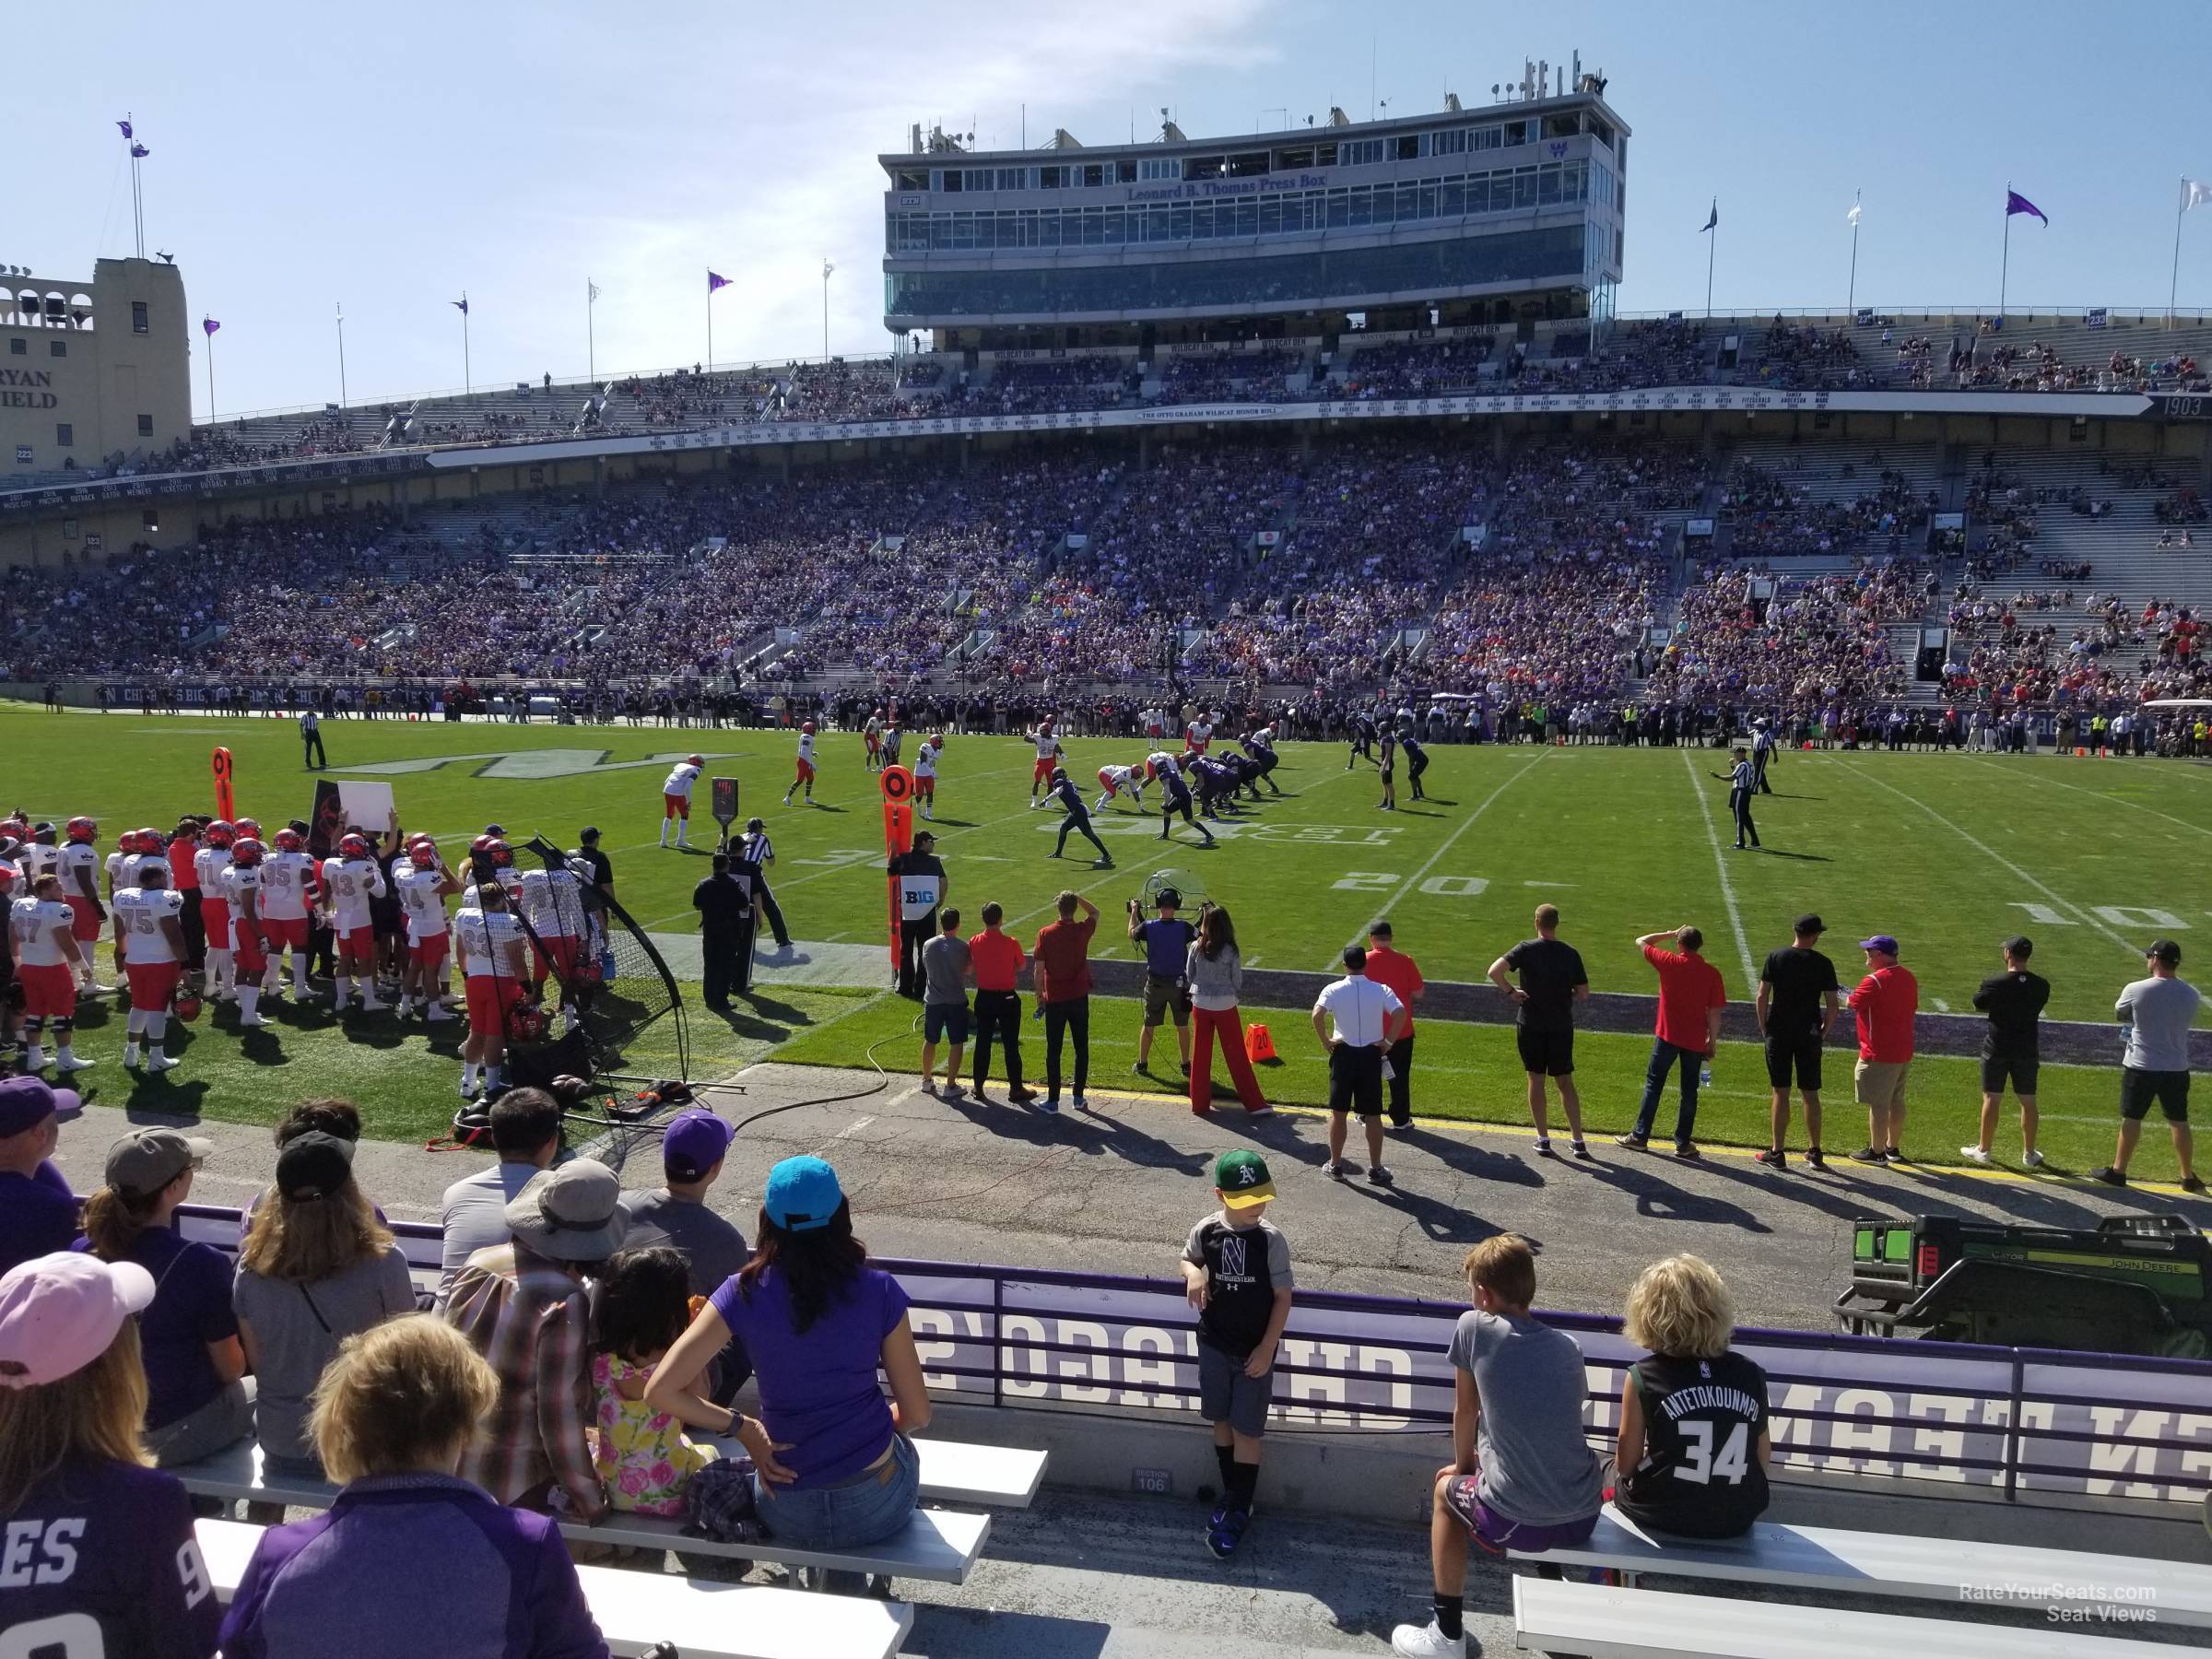 section 105, row 8 seat view  - ryan field